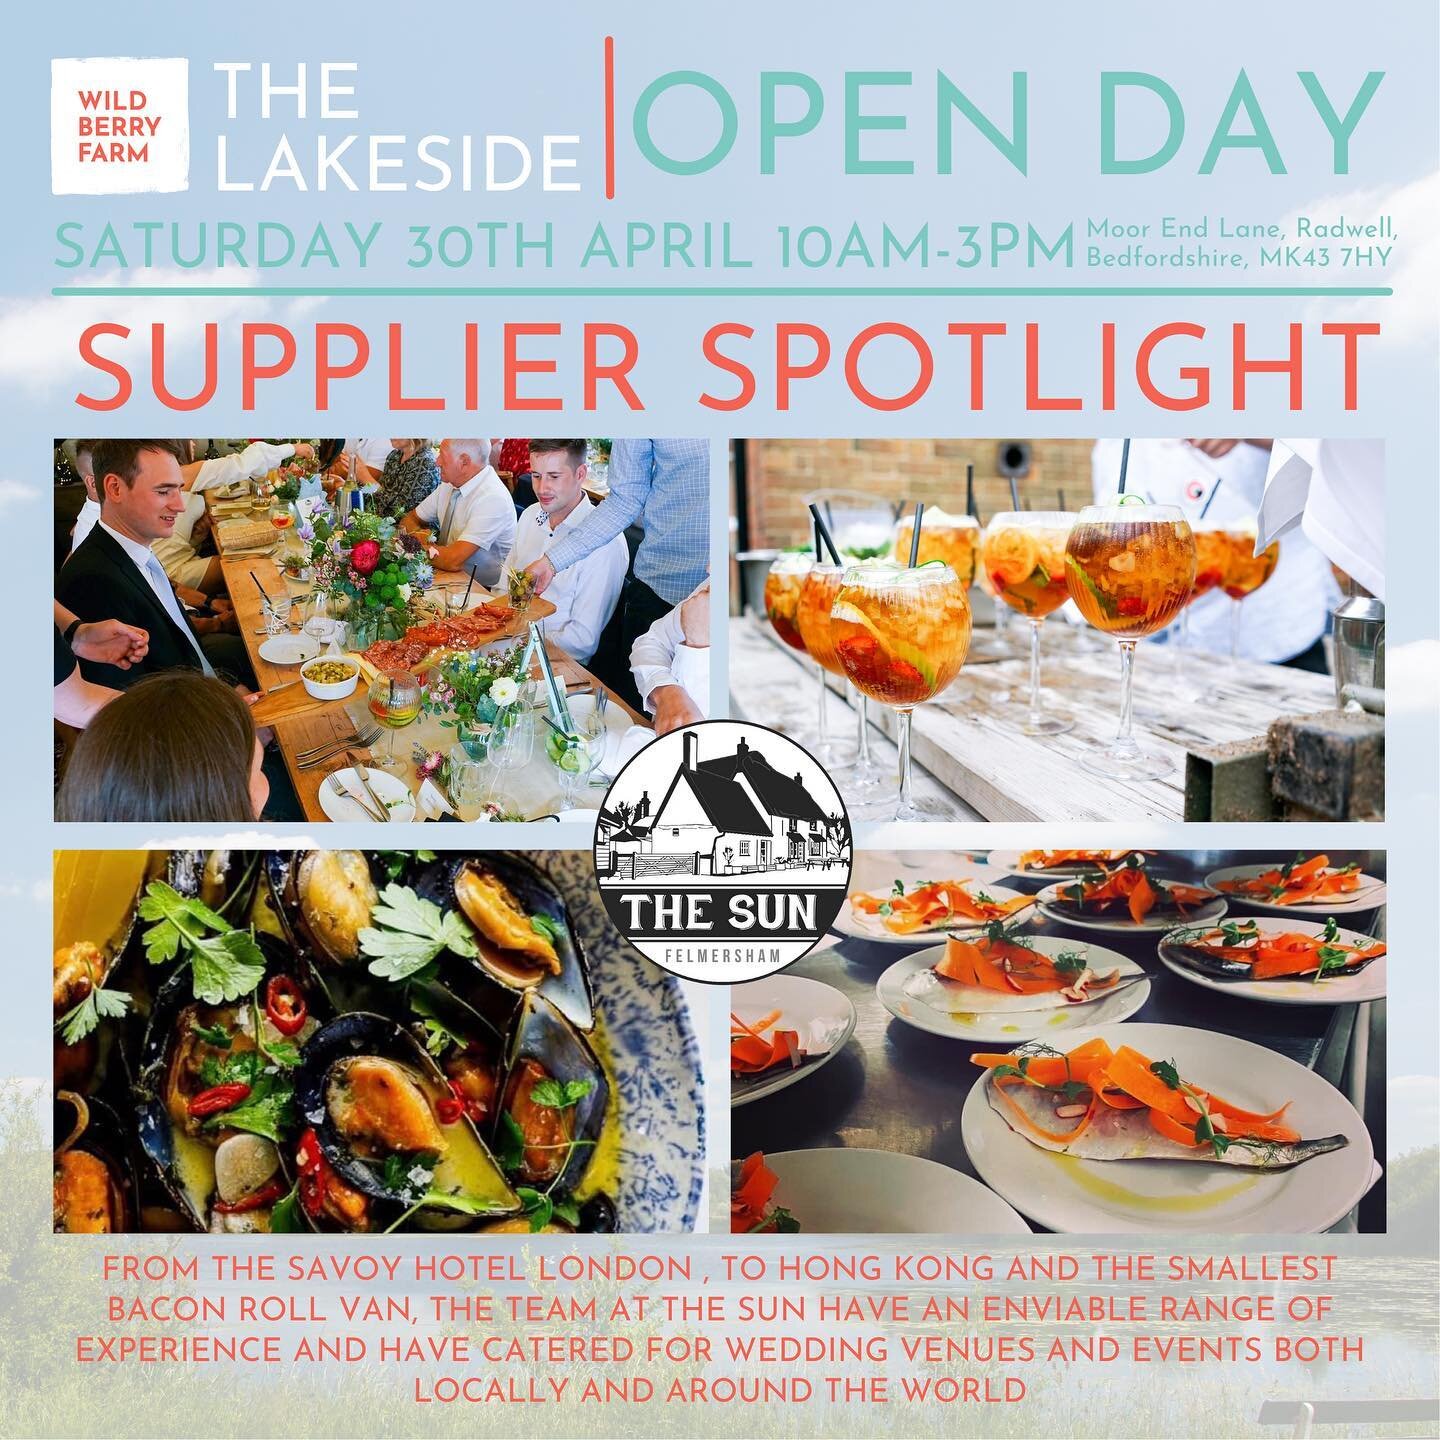 Supplier Spotlight 🍽 | We&rsquo;re excited to have our preferred catering supplier, the team from @thesunfelmersham back at The Lakeside for our open day on the 30th April.

If you&rsquo;re local to North Bedfordshire you&rsquo;ll know about the ama